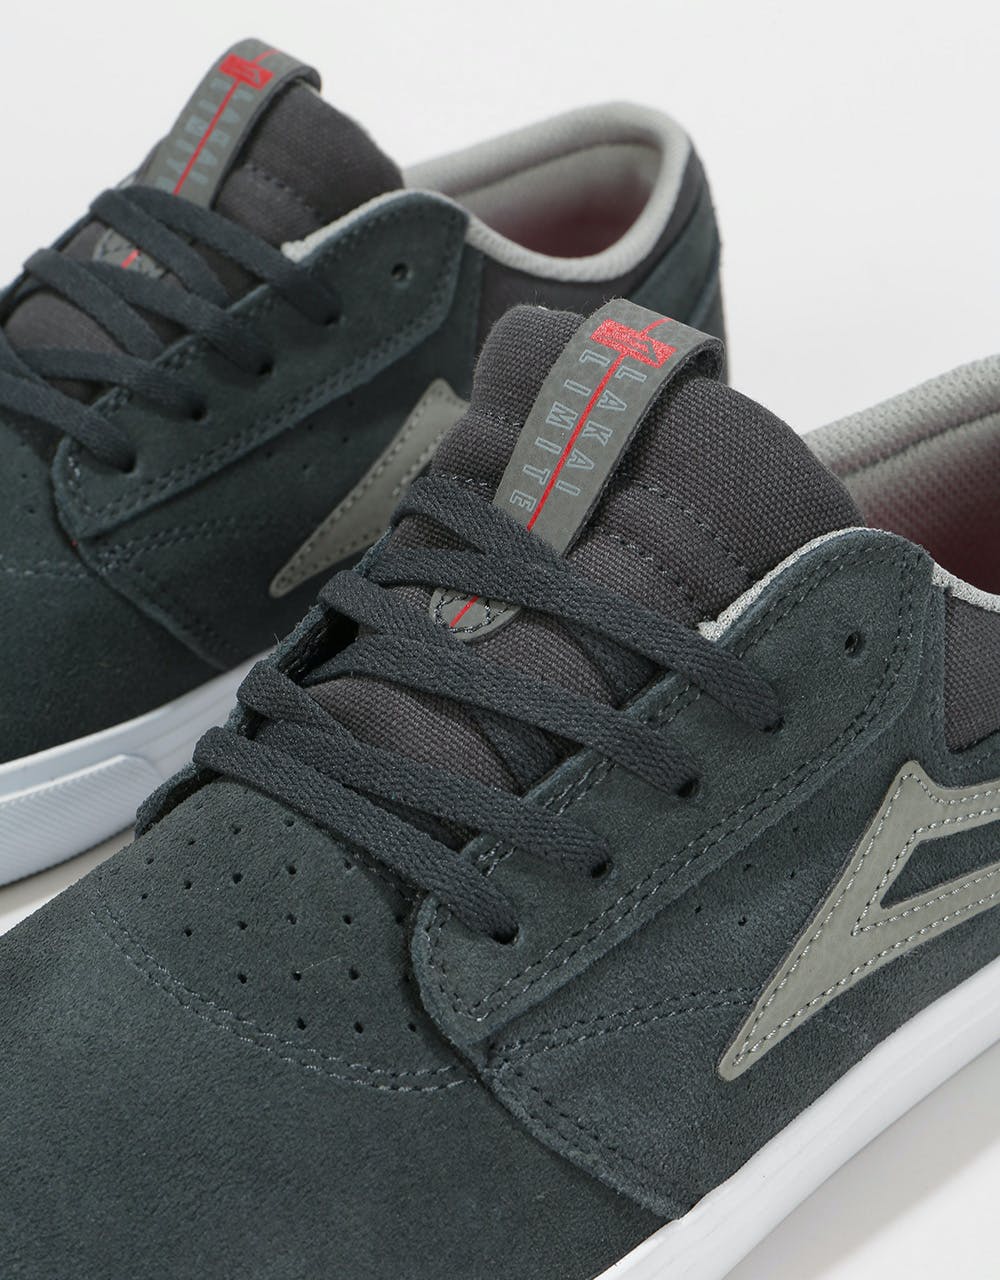 Lakai Griffin Skate Shoes - Charcoal Suede